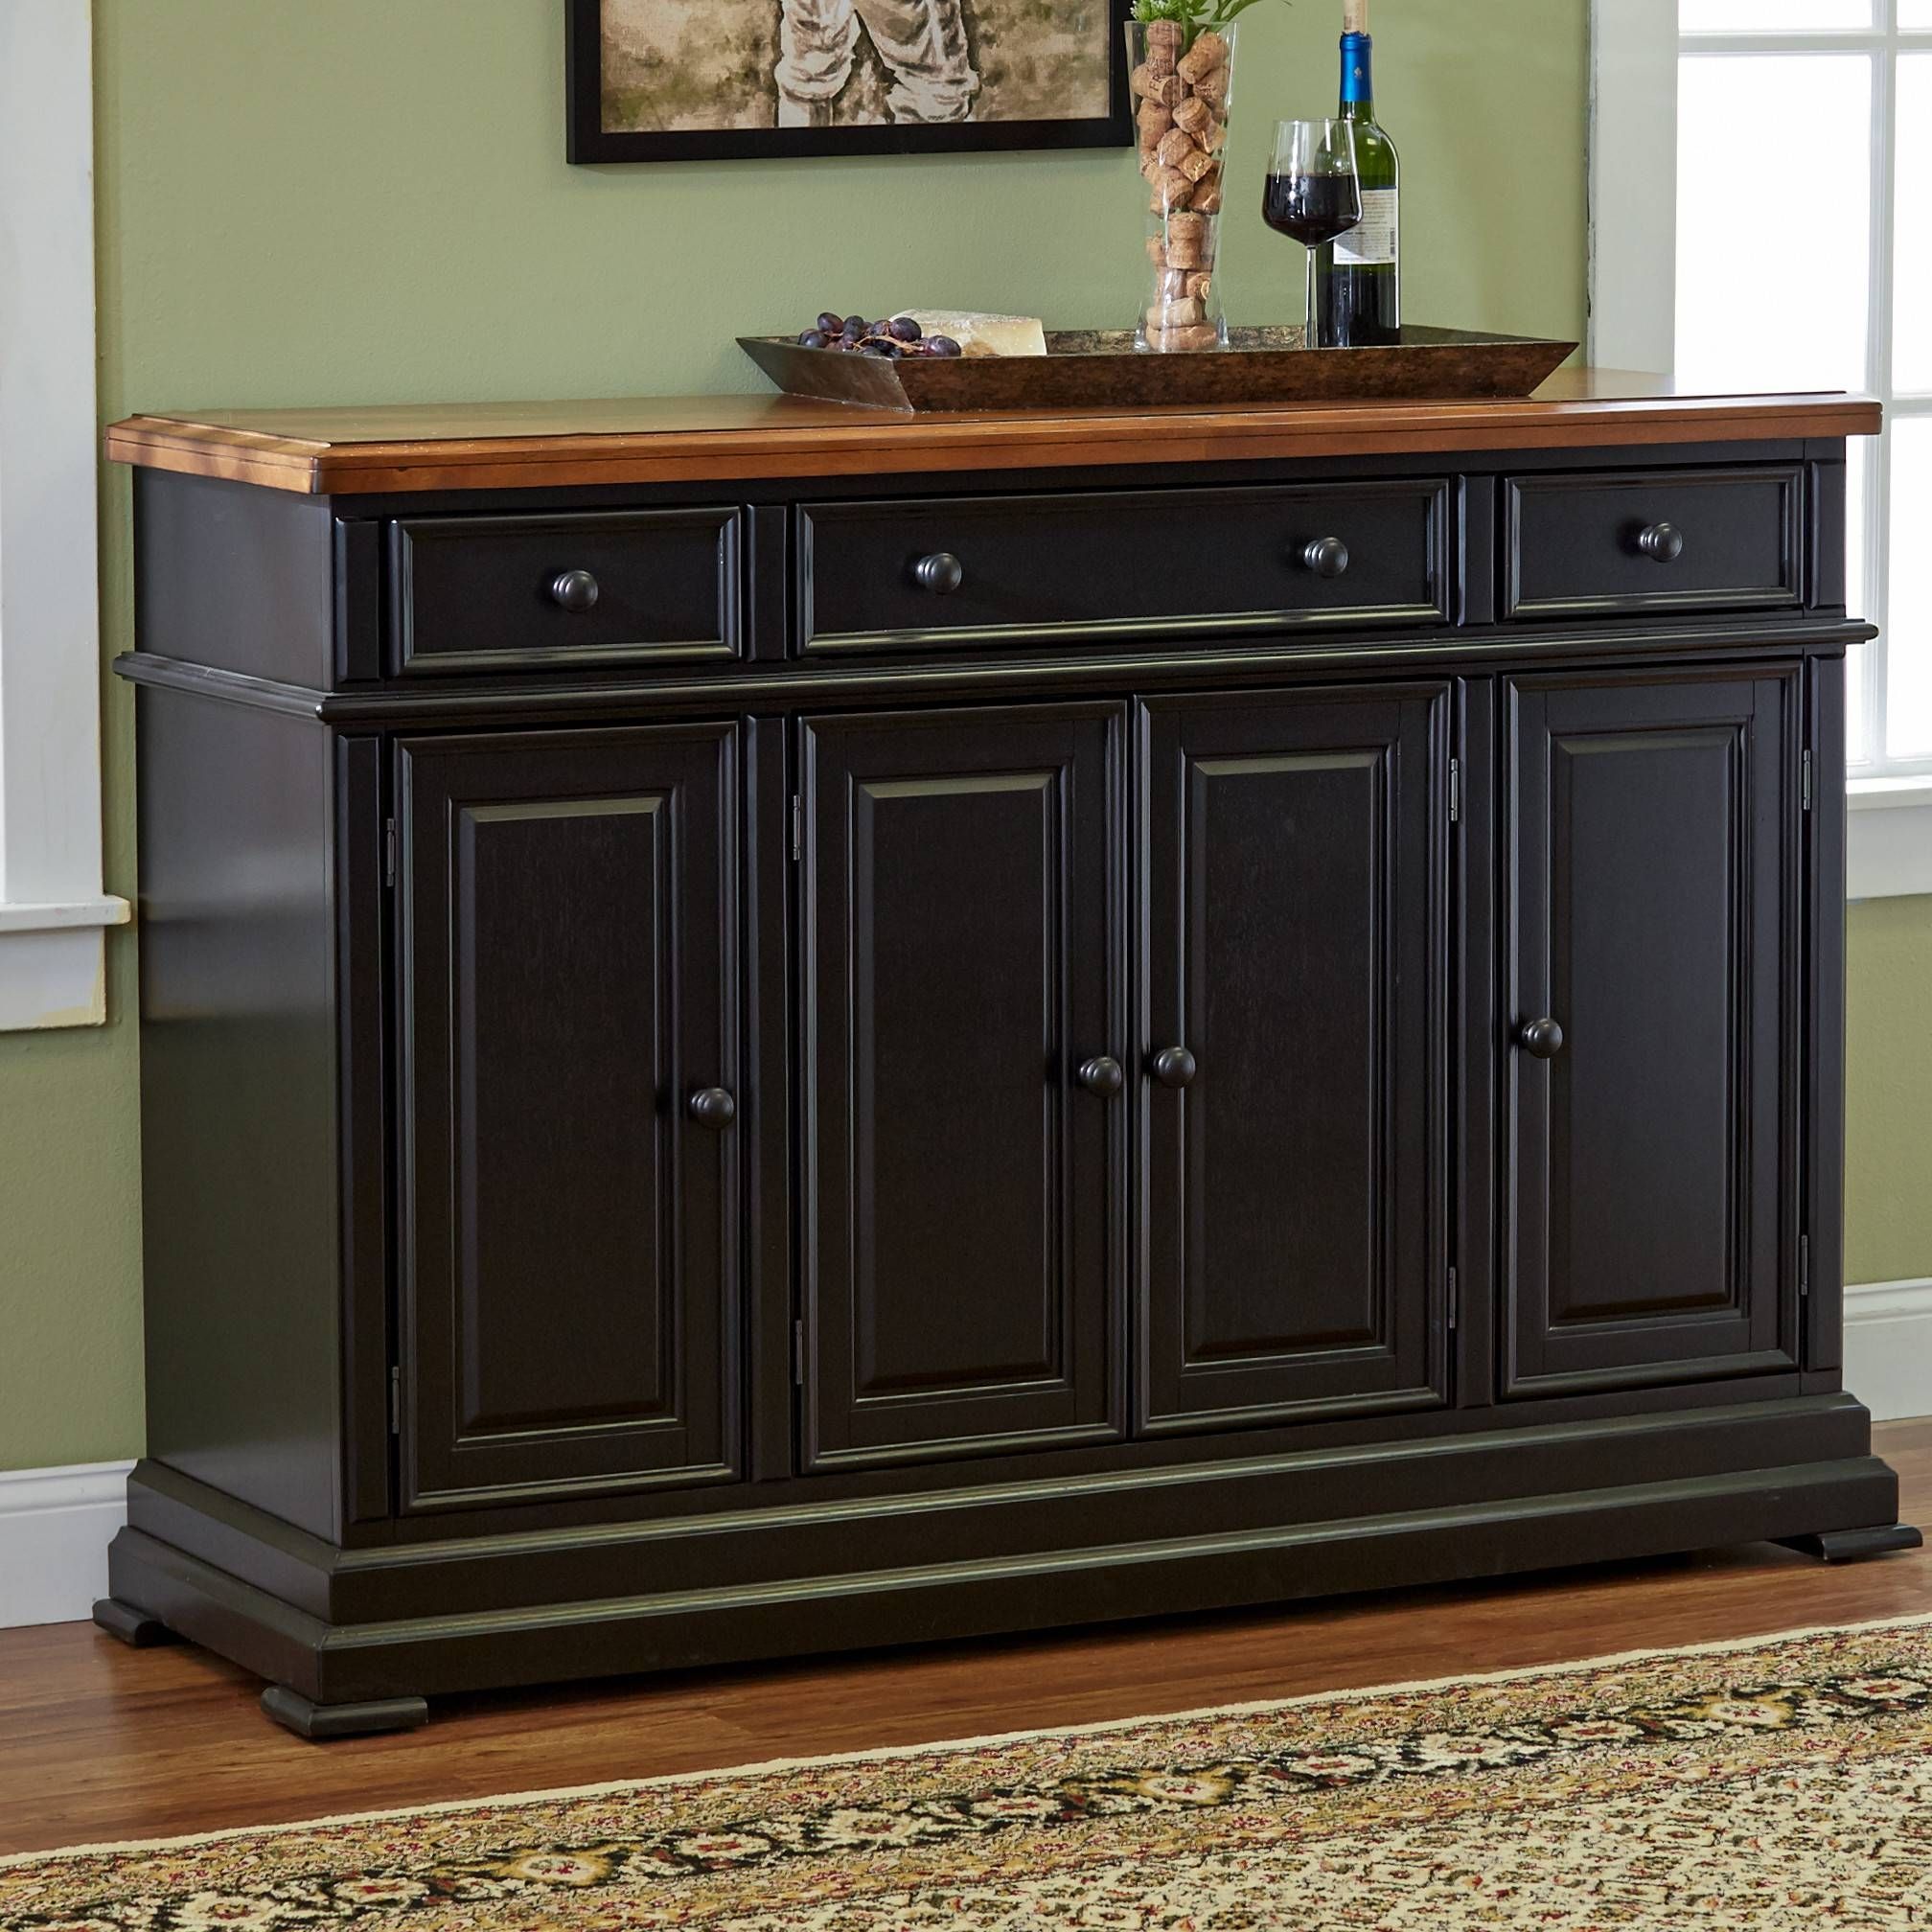 Dining Room Buffet Cabinet Sideboards Buffets Storage Servers 17 Regarding Current Dining Sideboards (View 13 of 15)